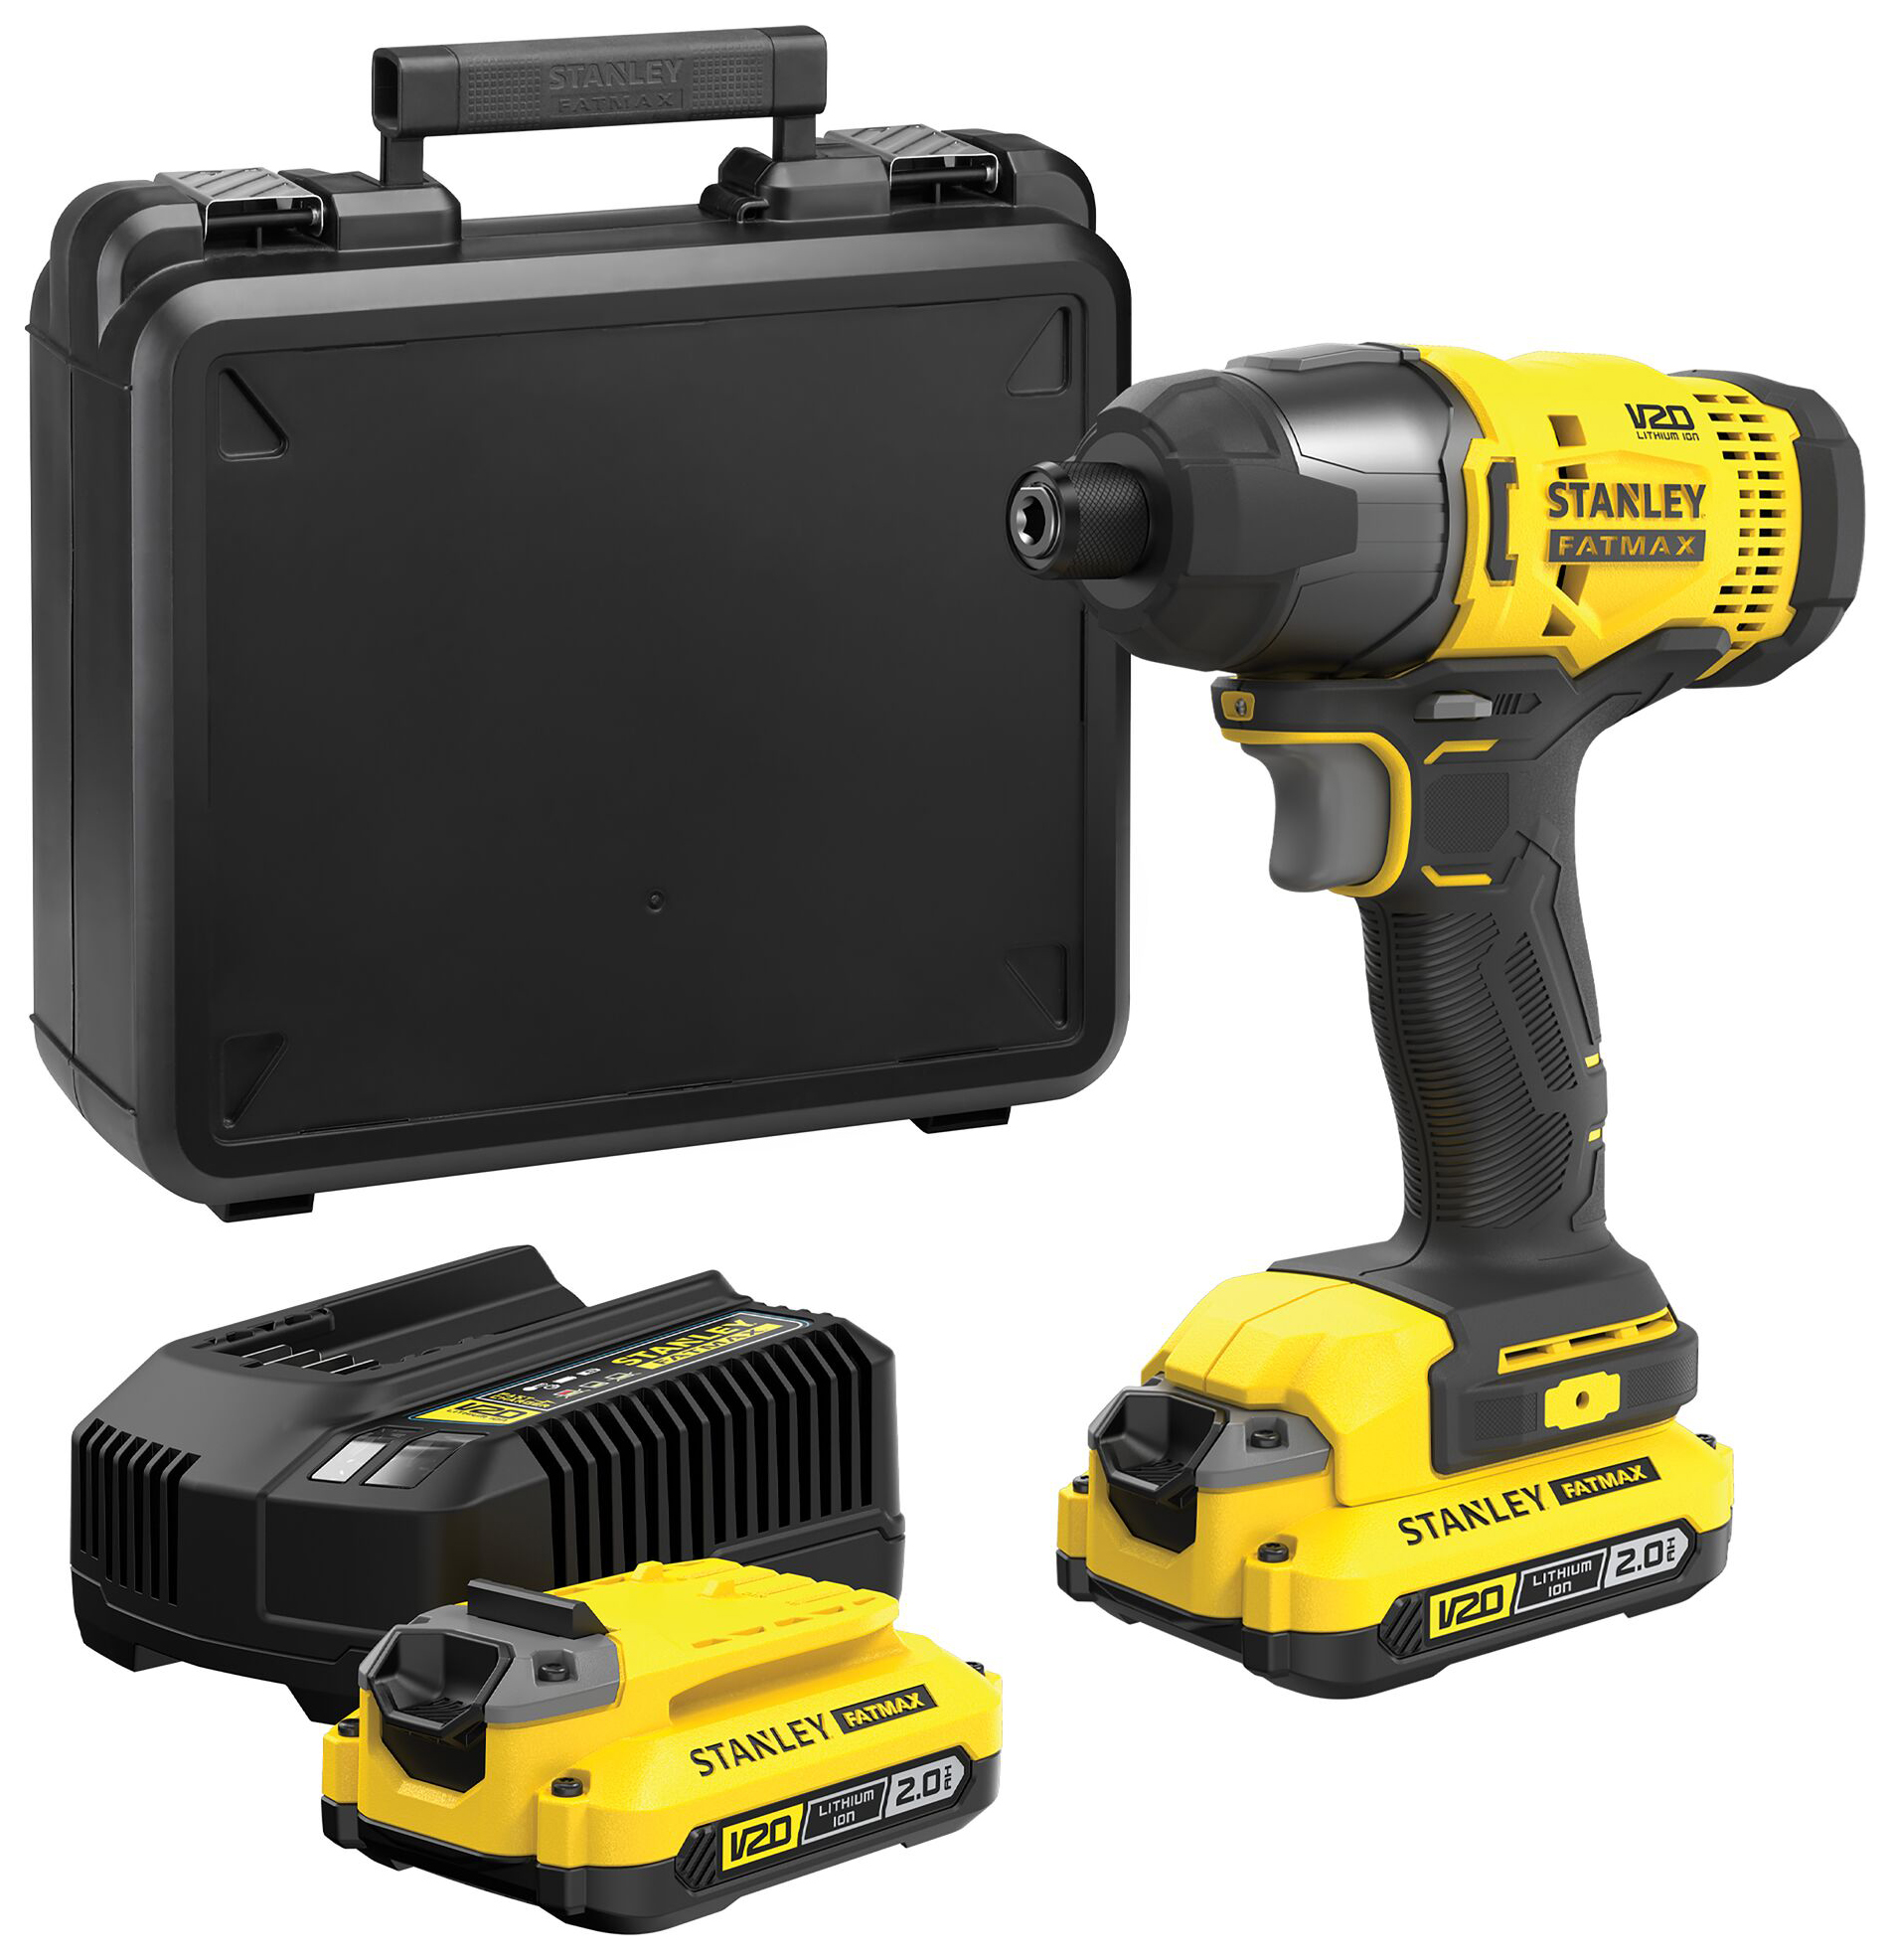 Image of Stanley FatMax® V20 SFMCF800D2K-GB 18V 2 x 2.0AH Cordless Brushed Impact Drill Driver with Kitbox